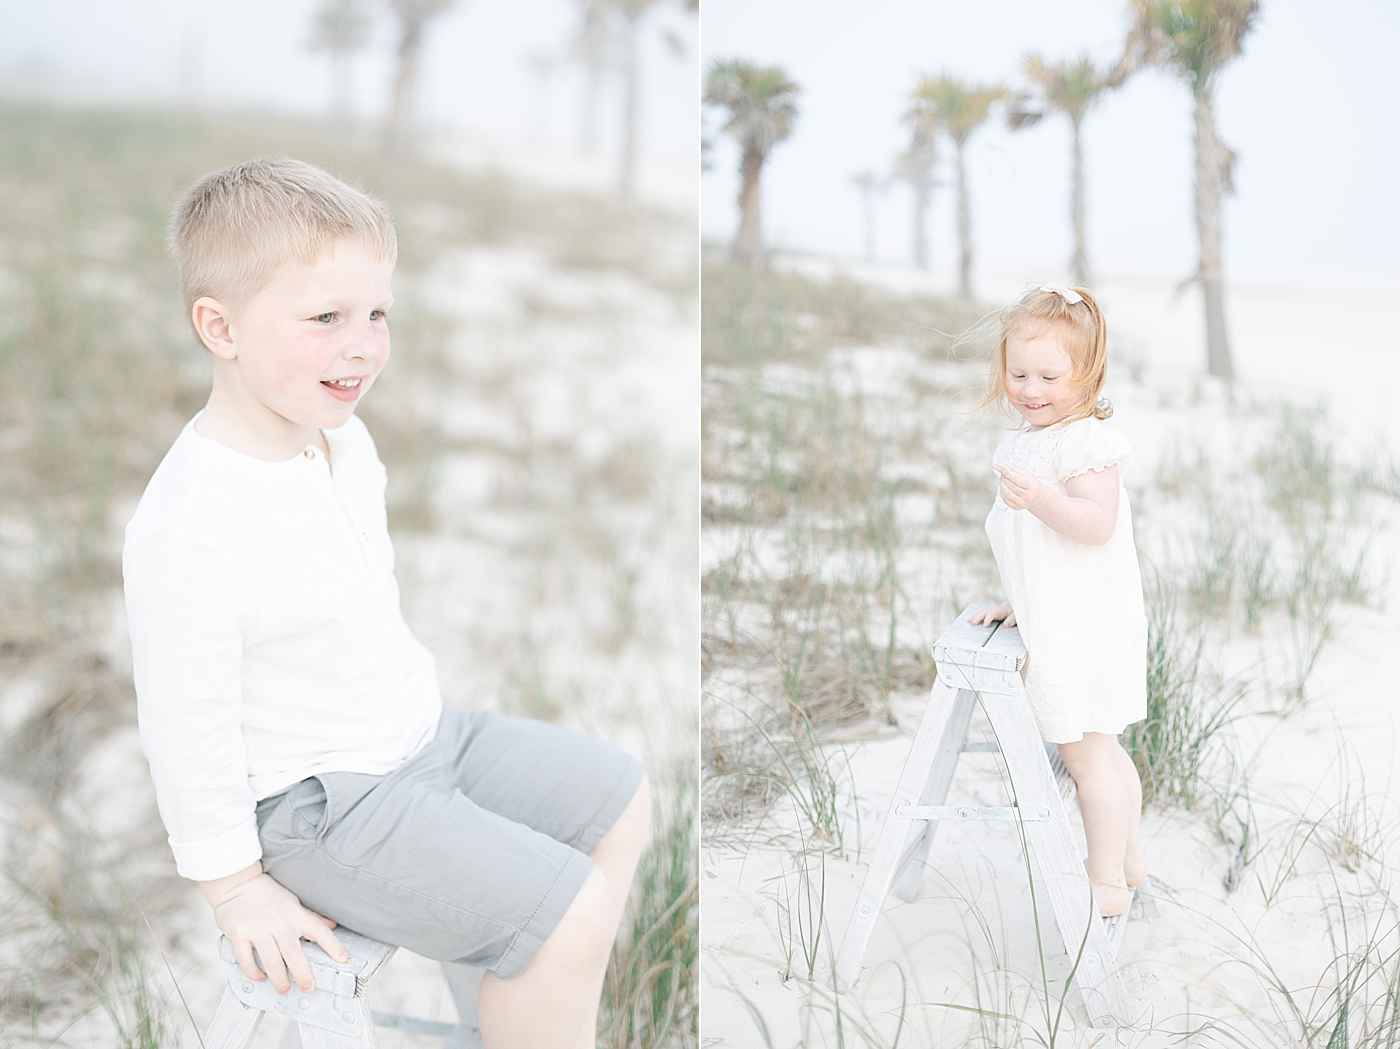 Children's portraits on the beach. Photo by Little Sunshine Photography.